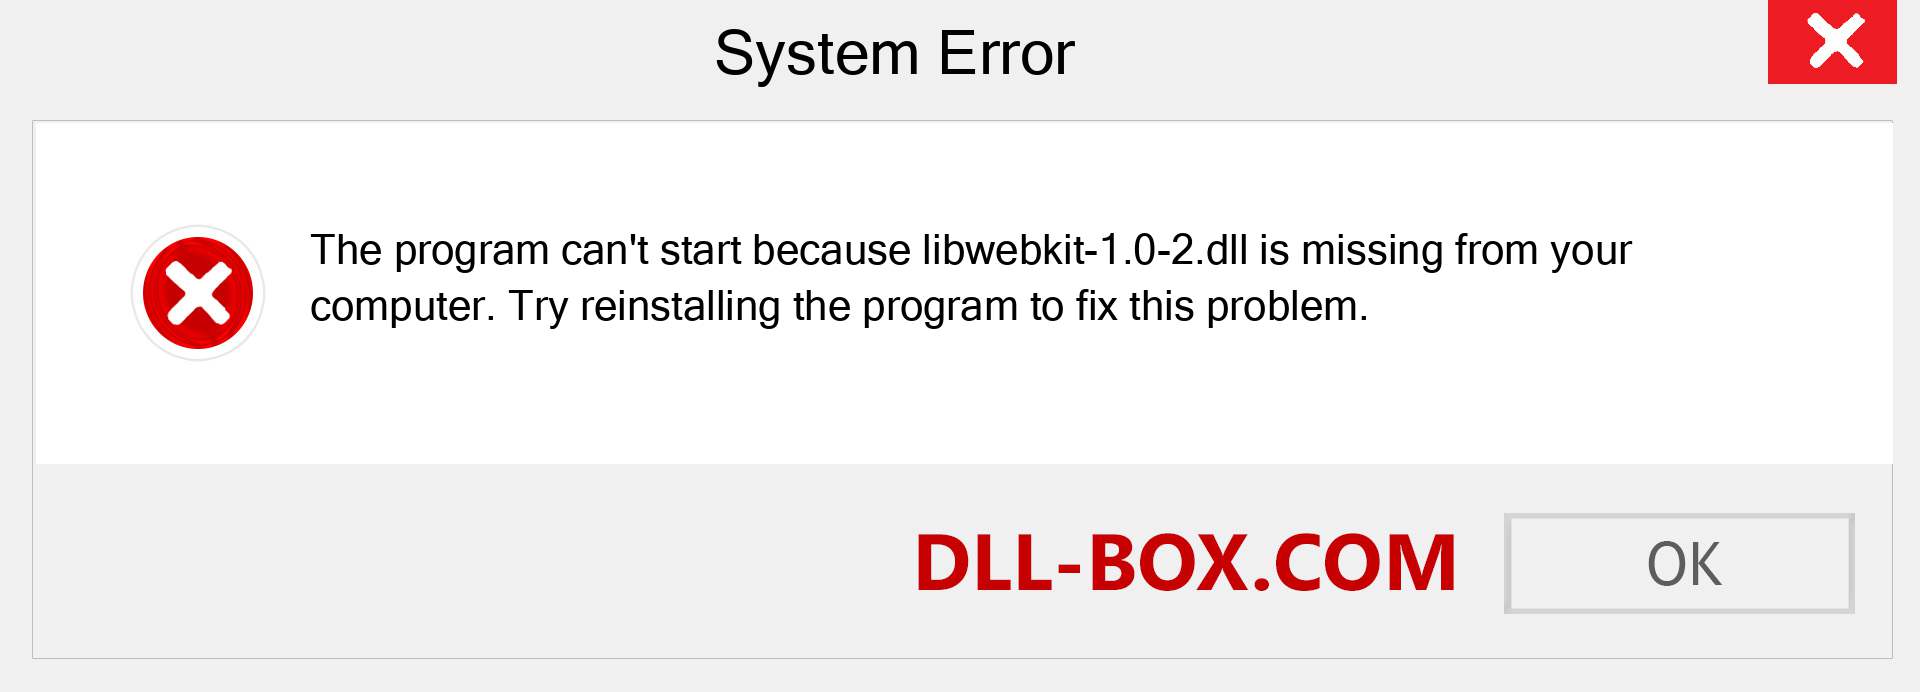  libwebkit-1.0-2.dll file is missing?. Download for Windows 7, 8, 10 - Fix  libwebkit-1.0-2 dll Missing Error on Windows, photos, images